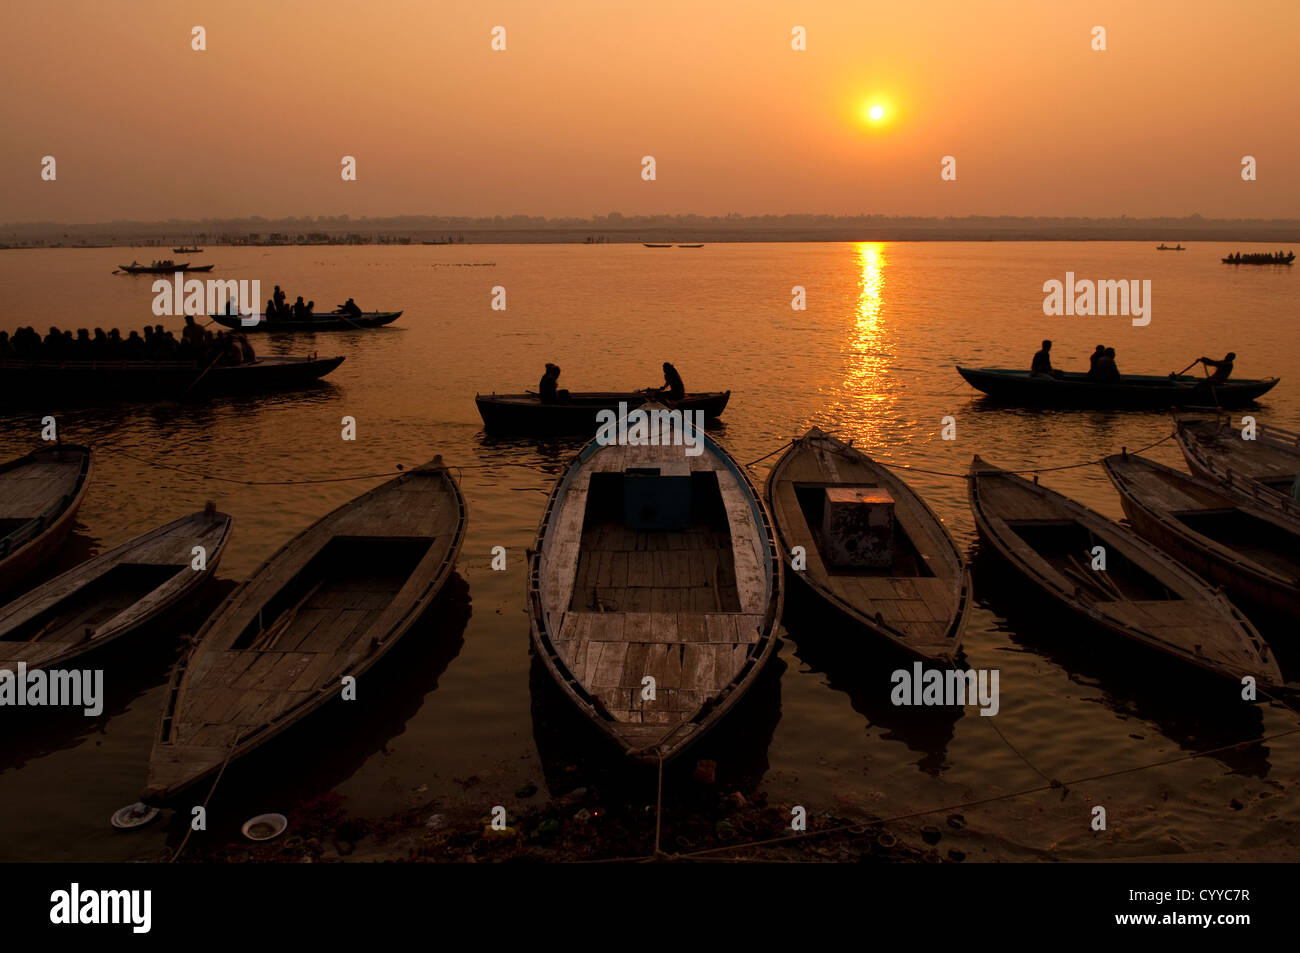 A stunning sunrise looking over the holiest of rivers in India. The Ganges. Silhouettes of boats dapple the horizon. Stock Photo